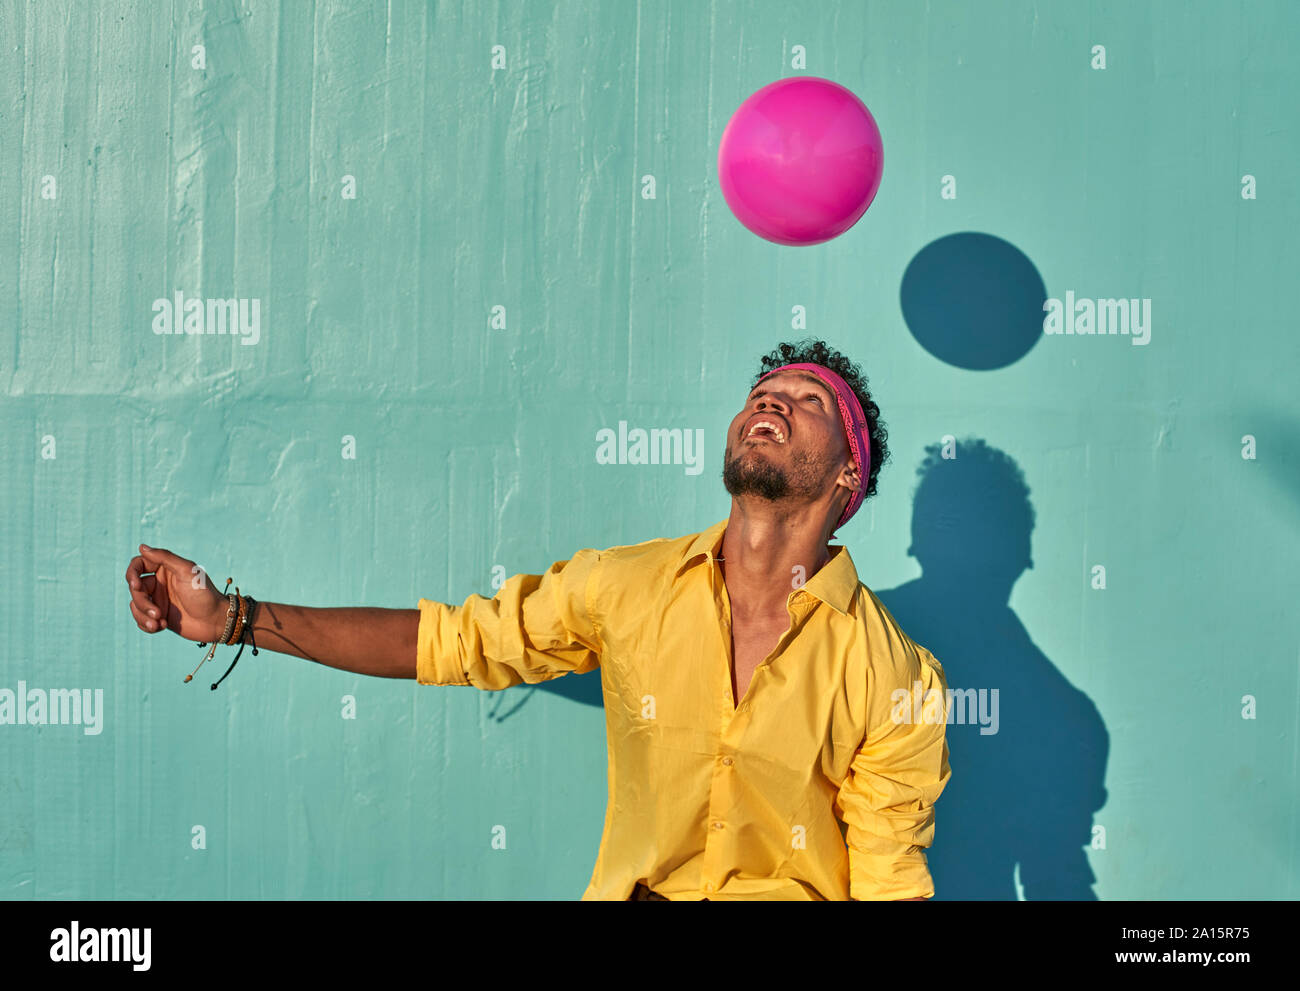 Young black man playing with a pink ball in front of a blue wall Stock Photo